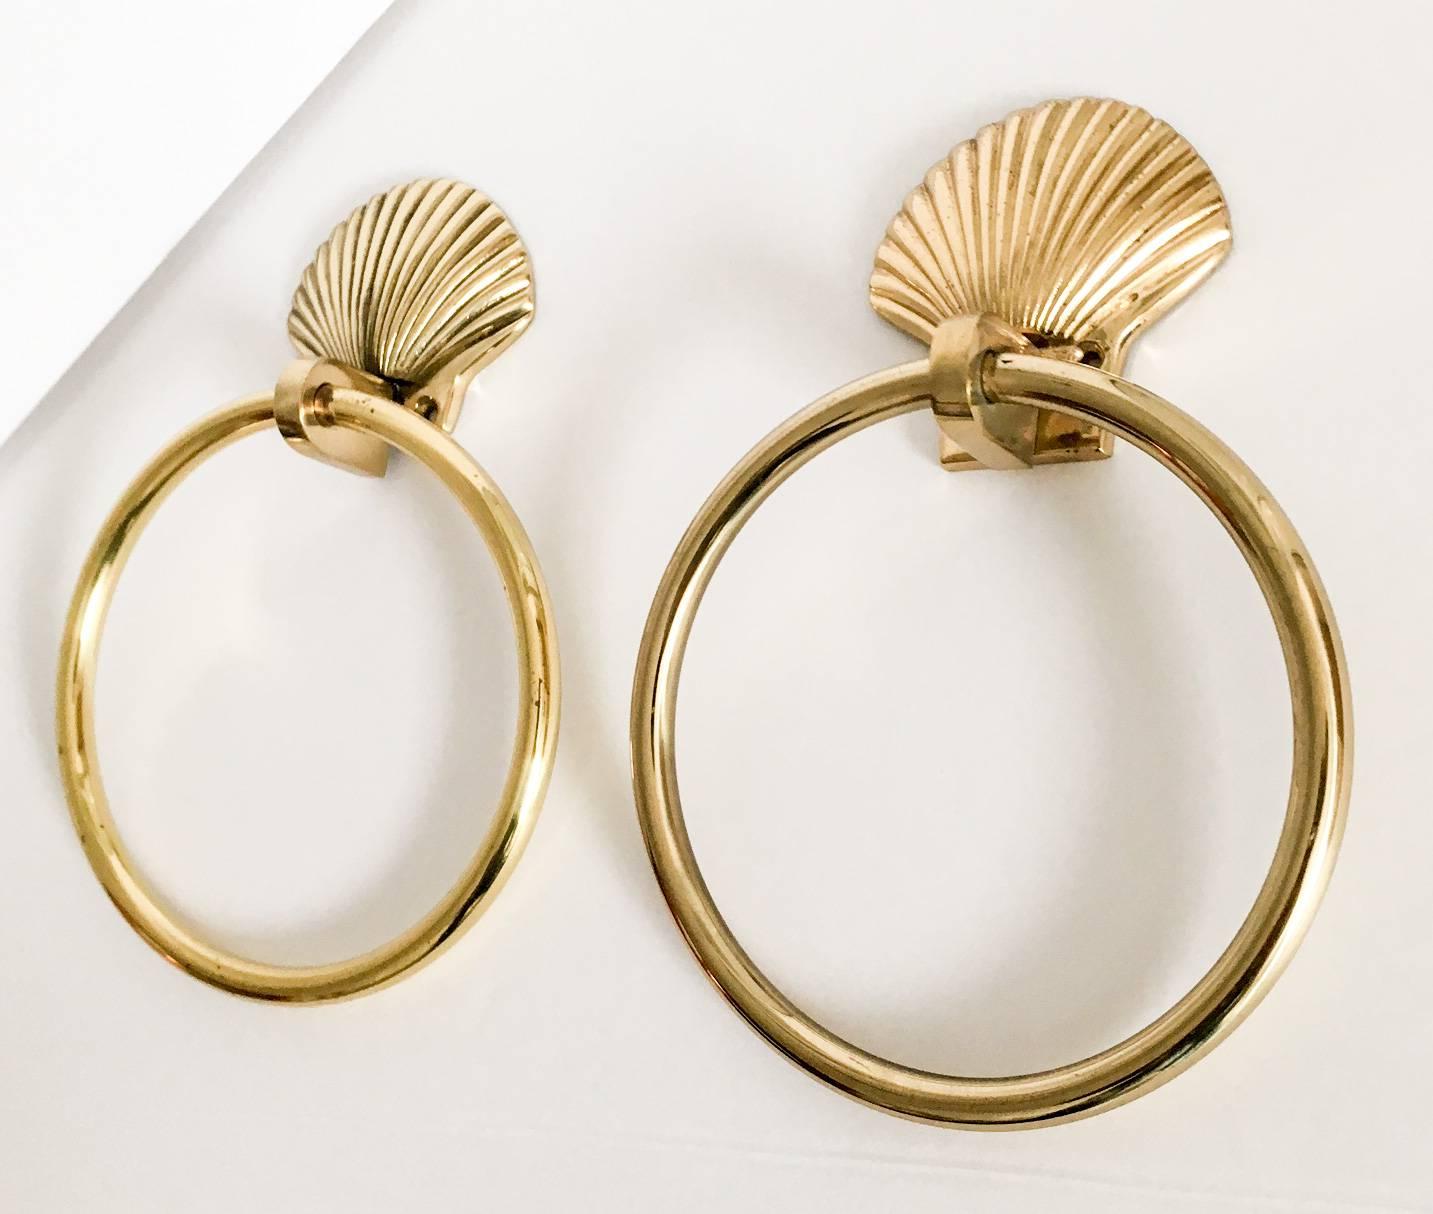 Handsome pair of nautical style brass guest towel rings. The shell mounts are solid brass and the rings are tubular hollow brass. Ring inside dimension, 5